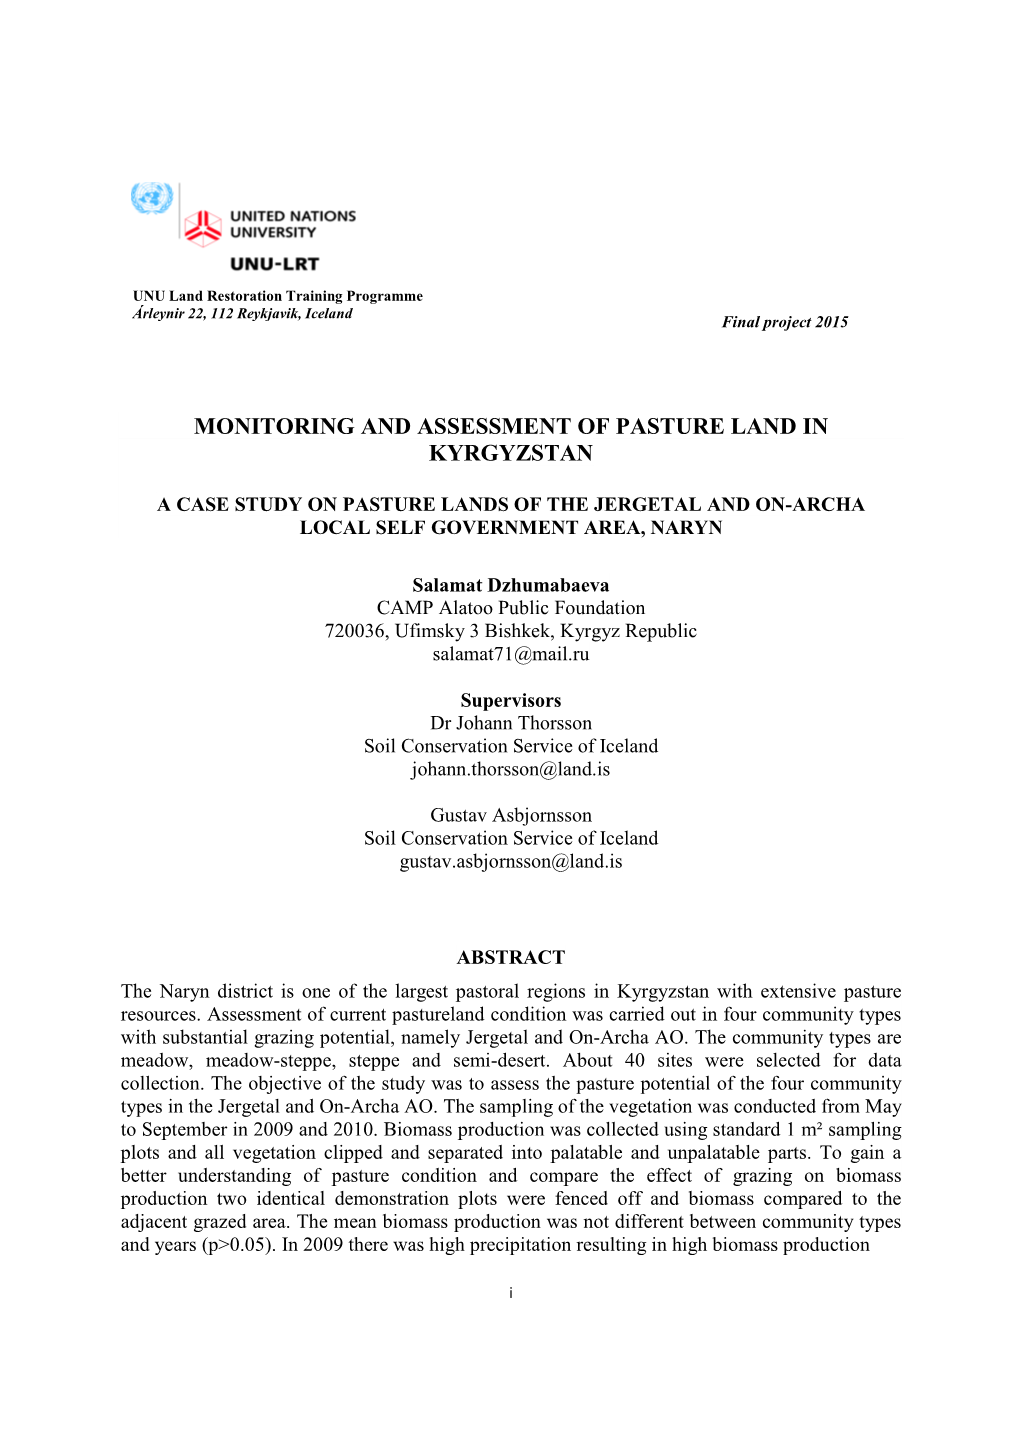 A Case Study on Pasture Lands of the Jergetal and On-Archa Local Self Government Area, Naryn